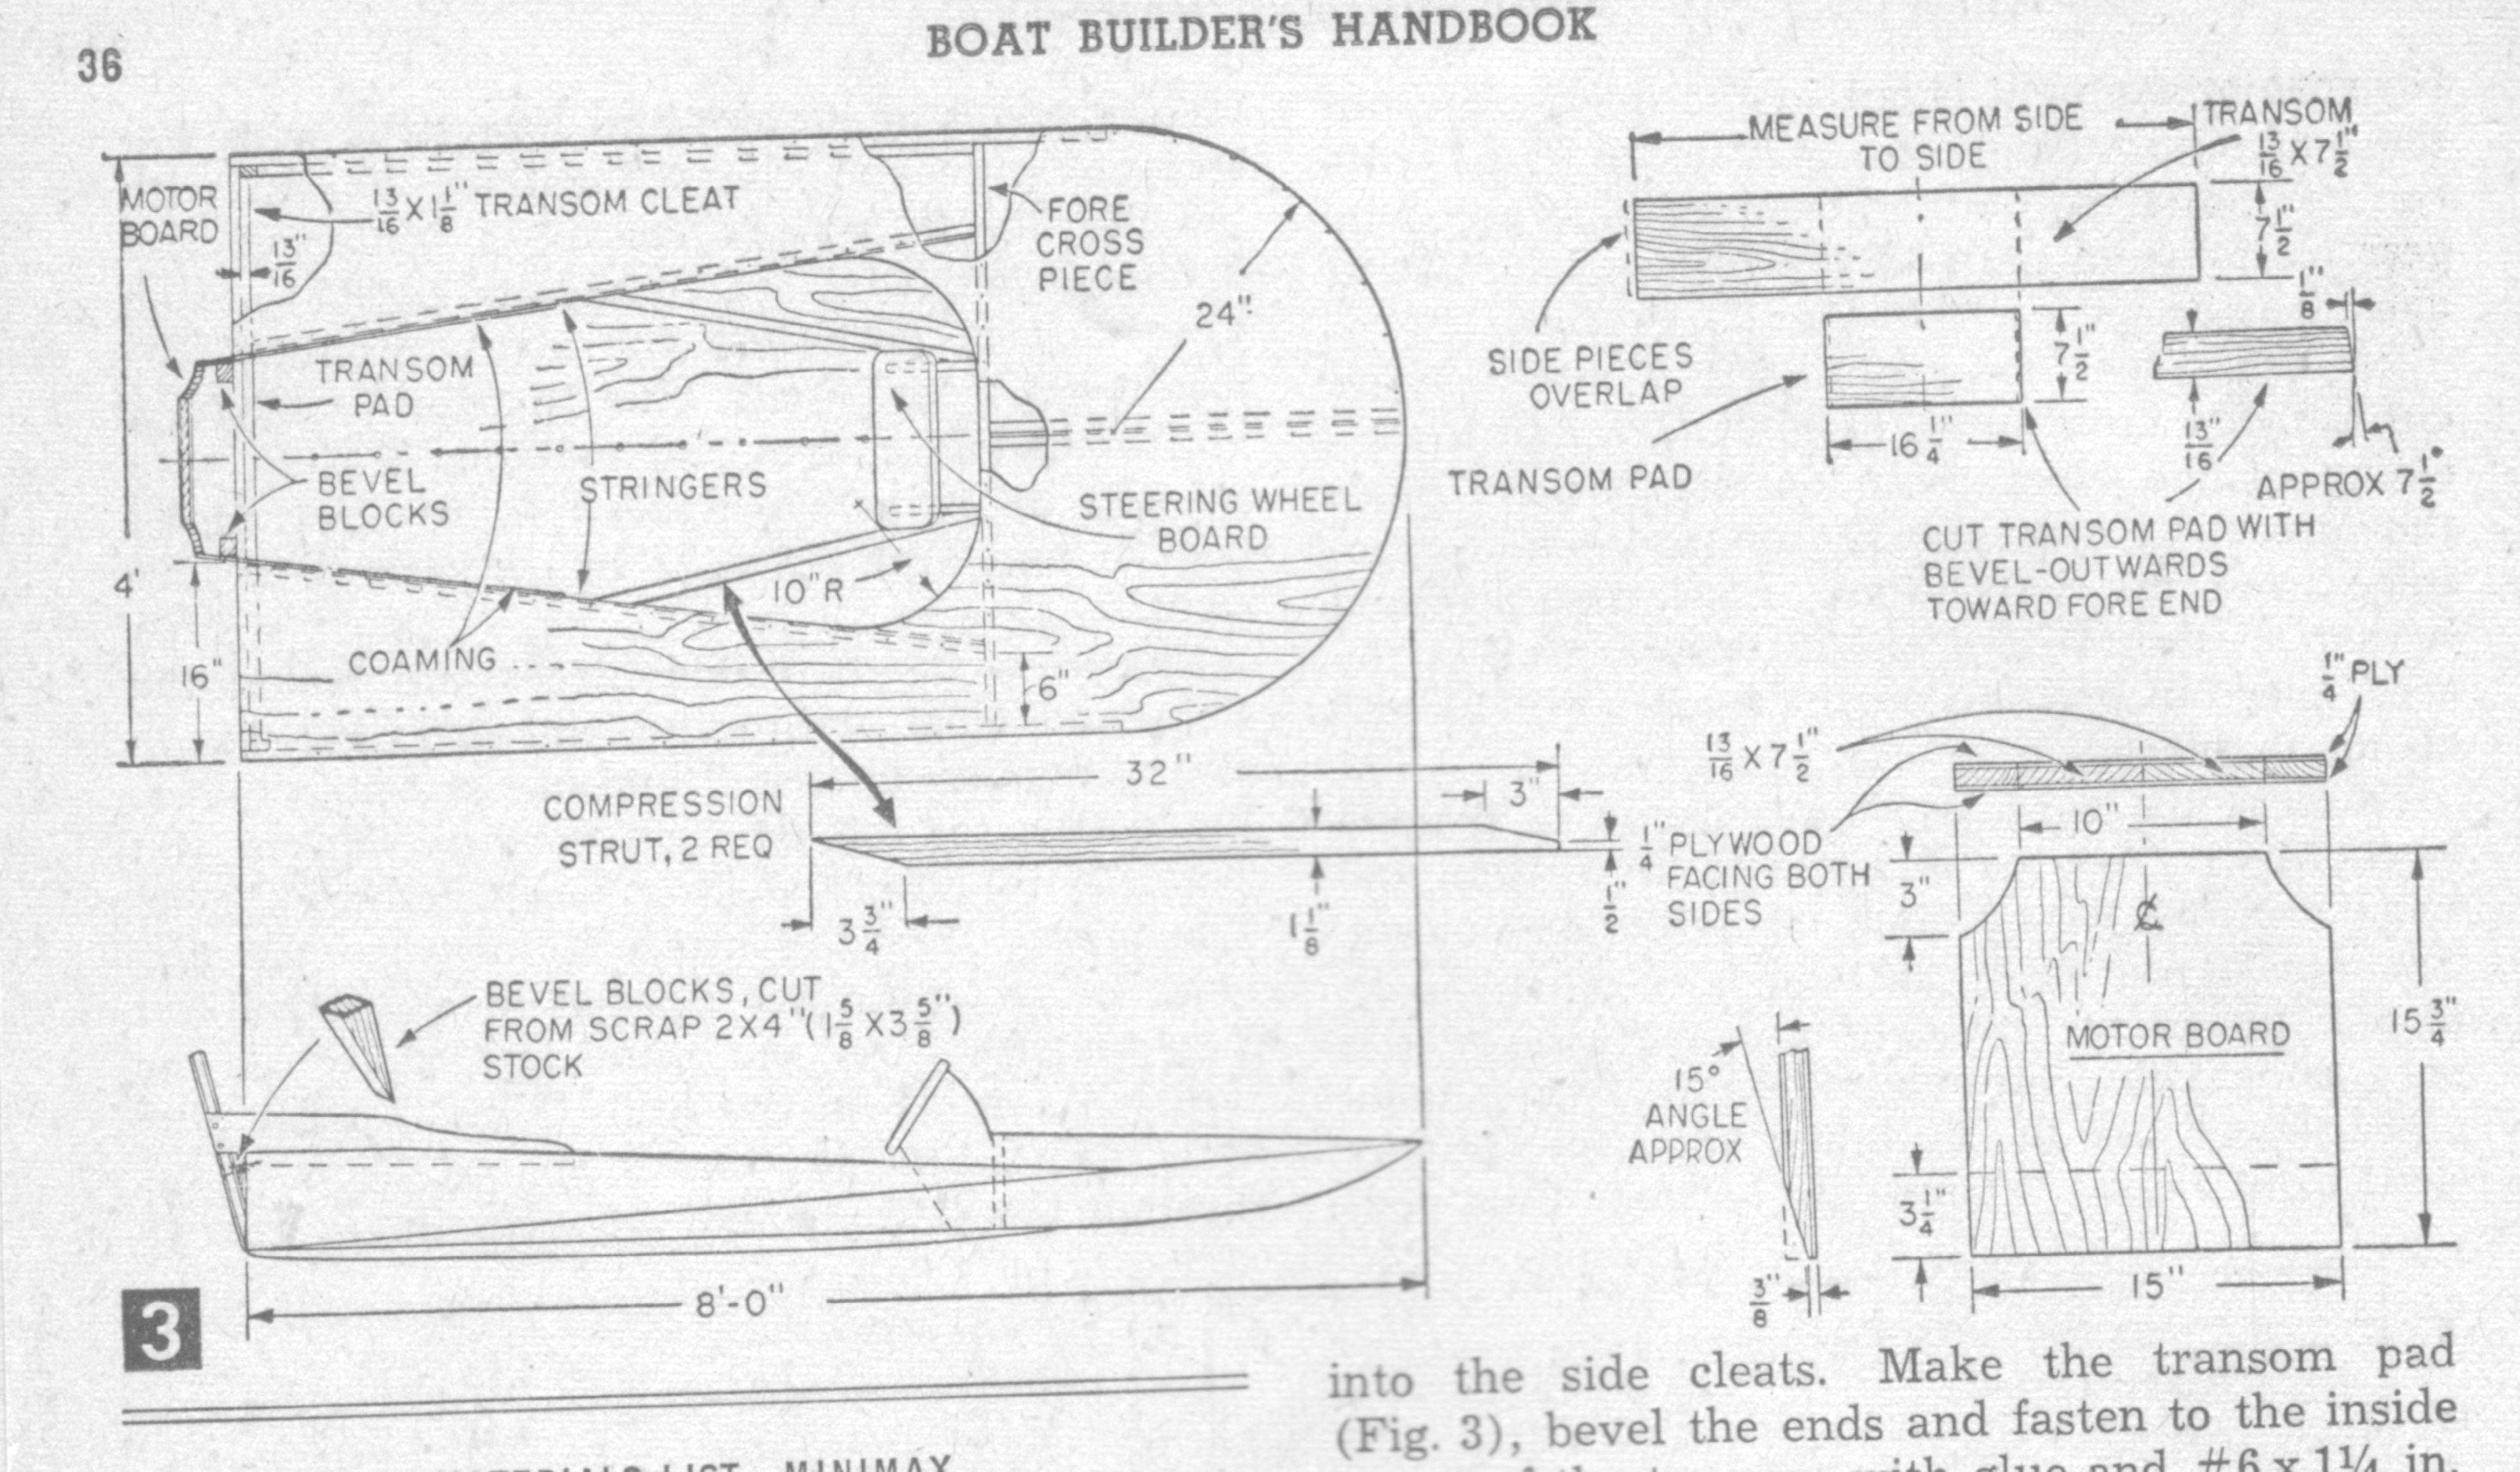 www.svensons.com - Free Boat Plans From "Science and ...